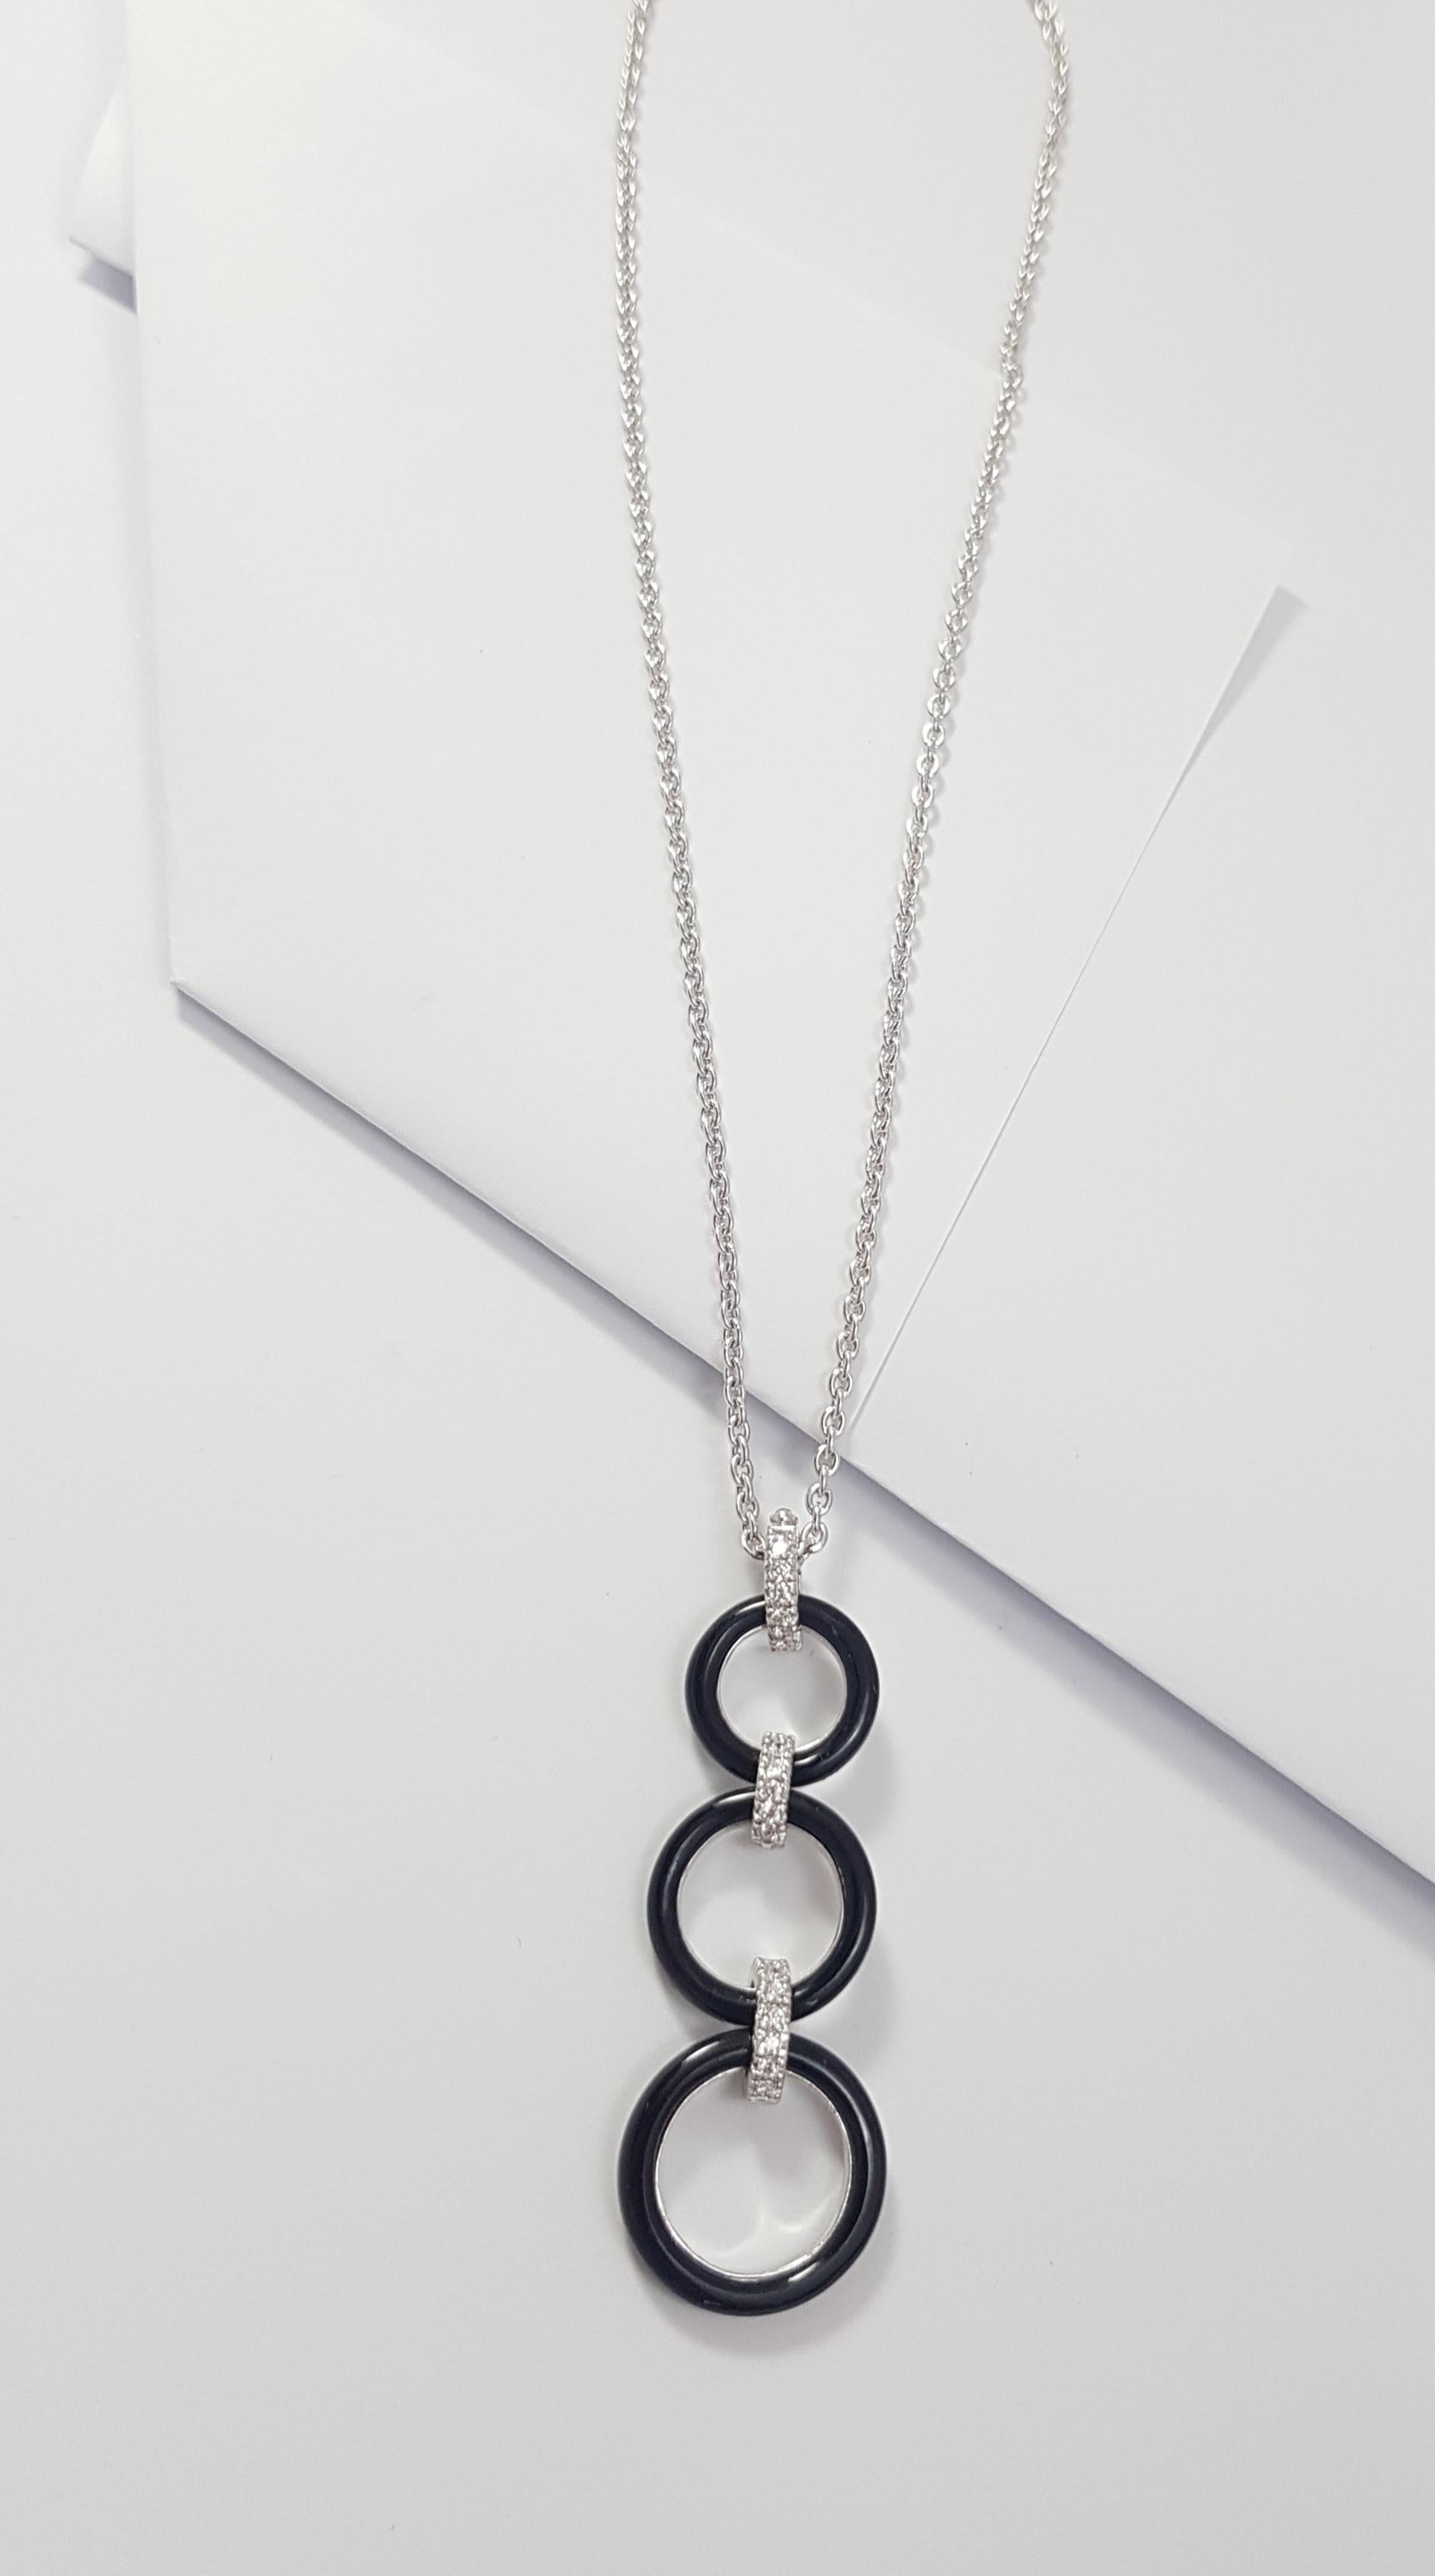 Onyx with Diamond Necklace Set in 18 Karat White Gold Settings For Sale 2